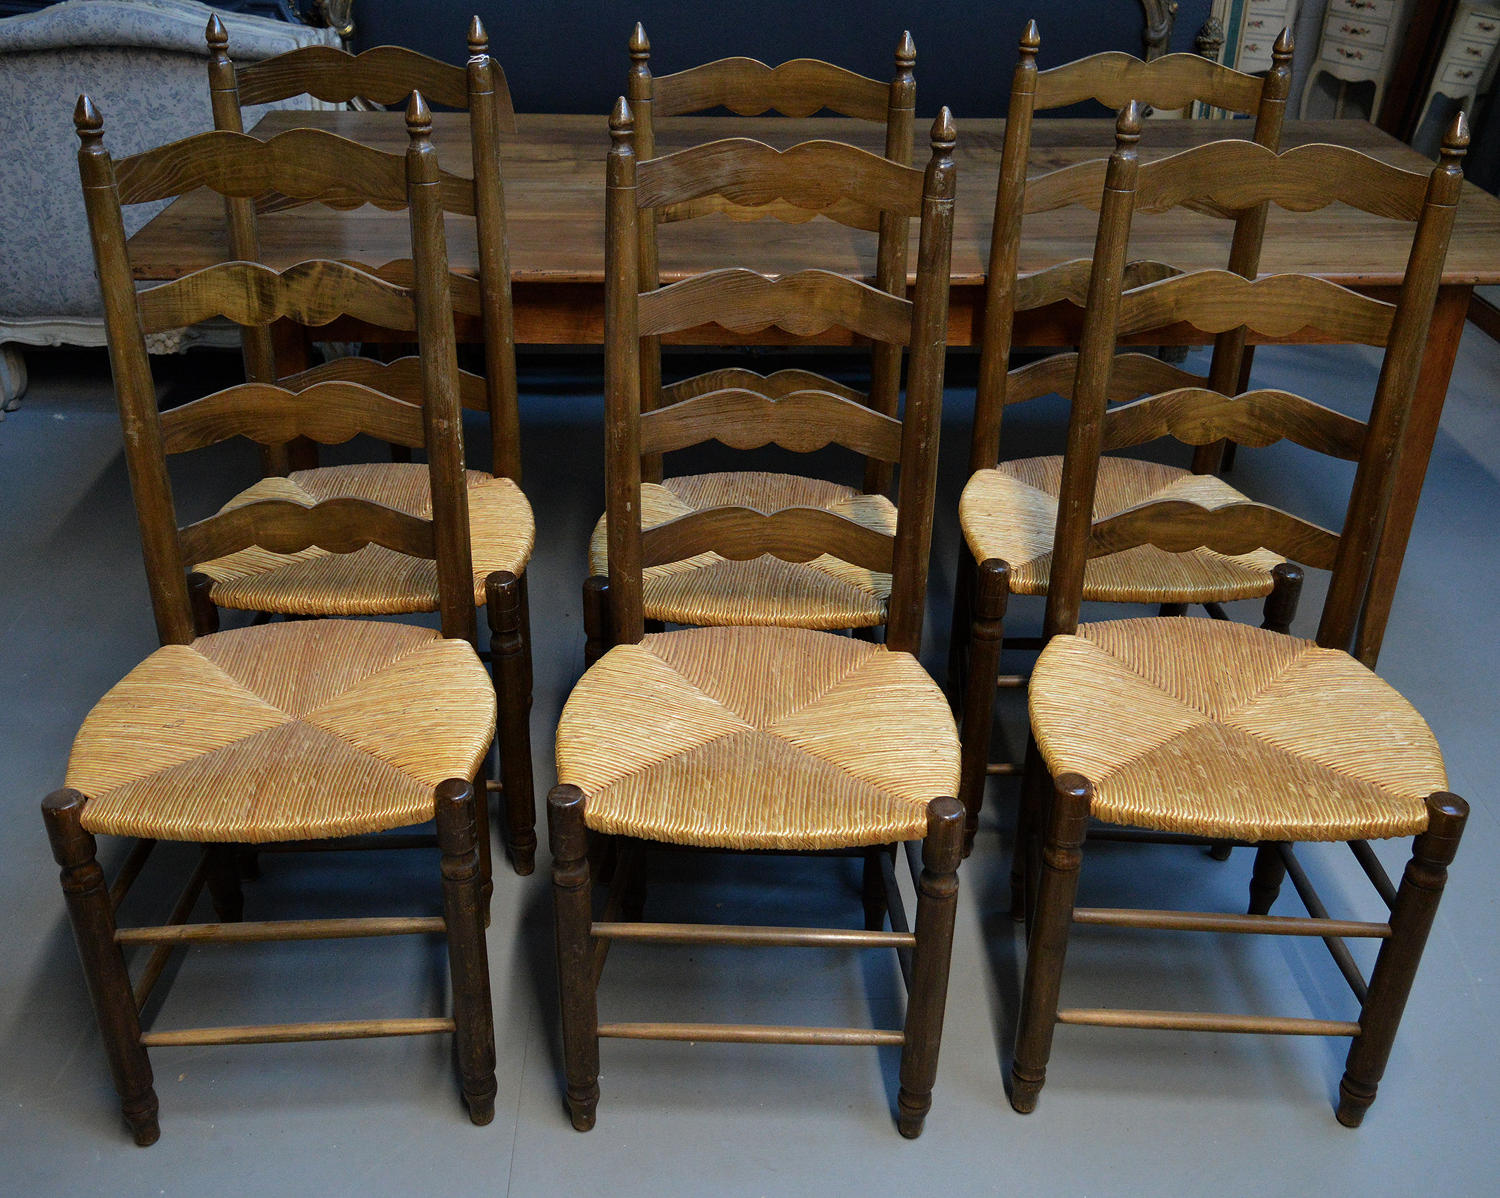 Set of 6 Ladder-back rush seated country chairs